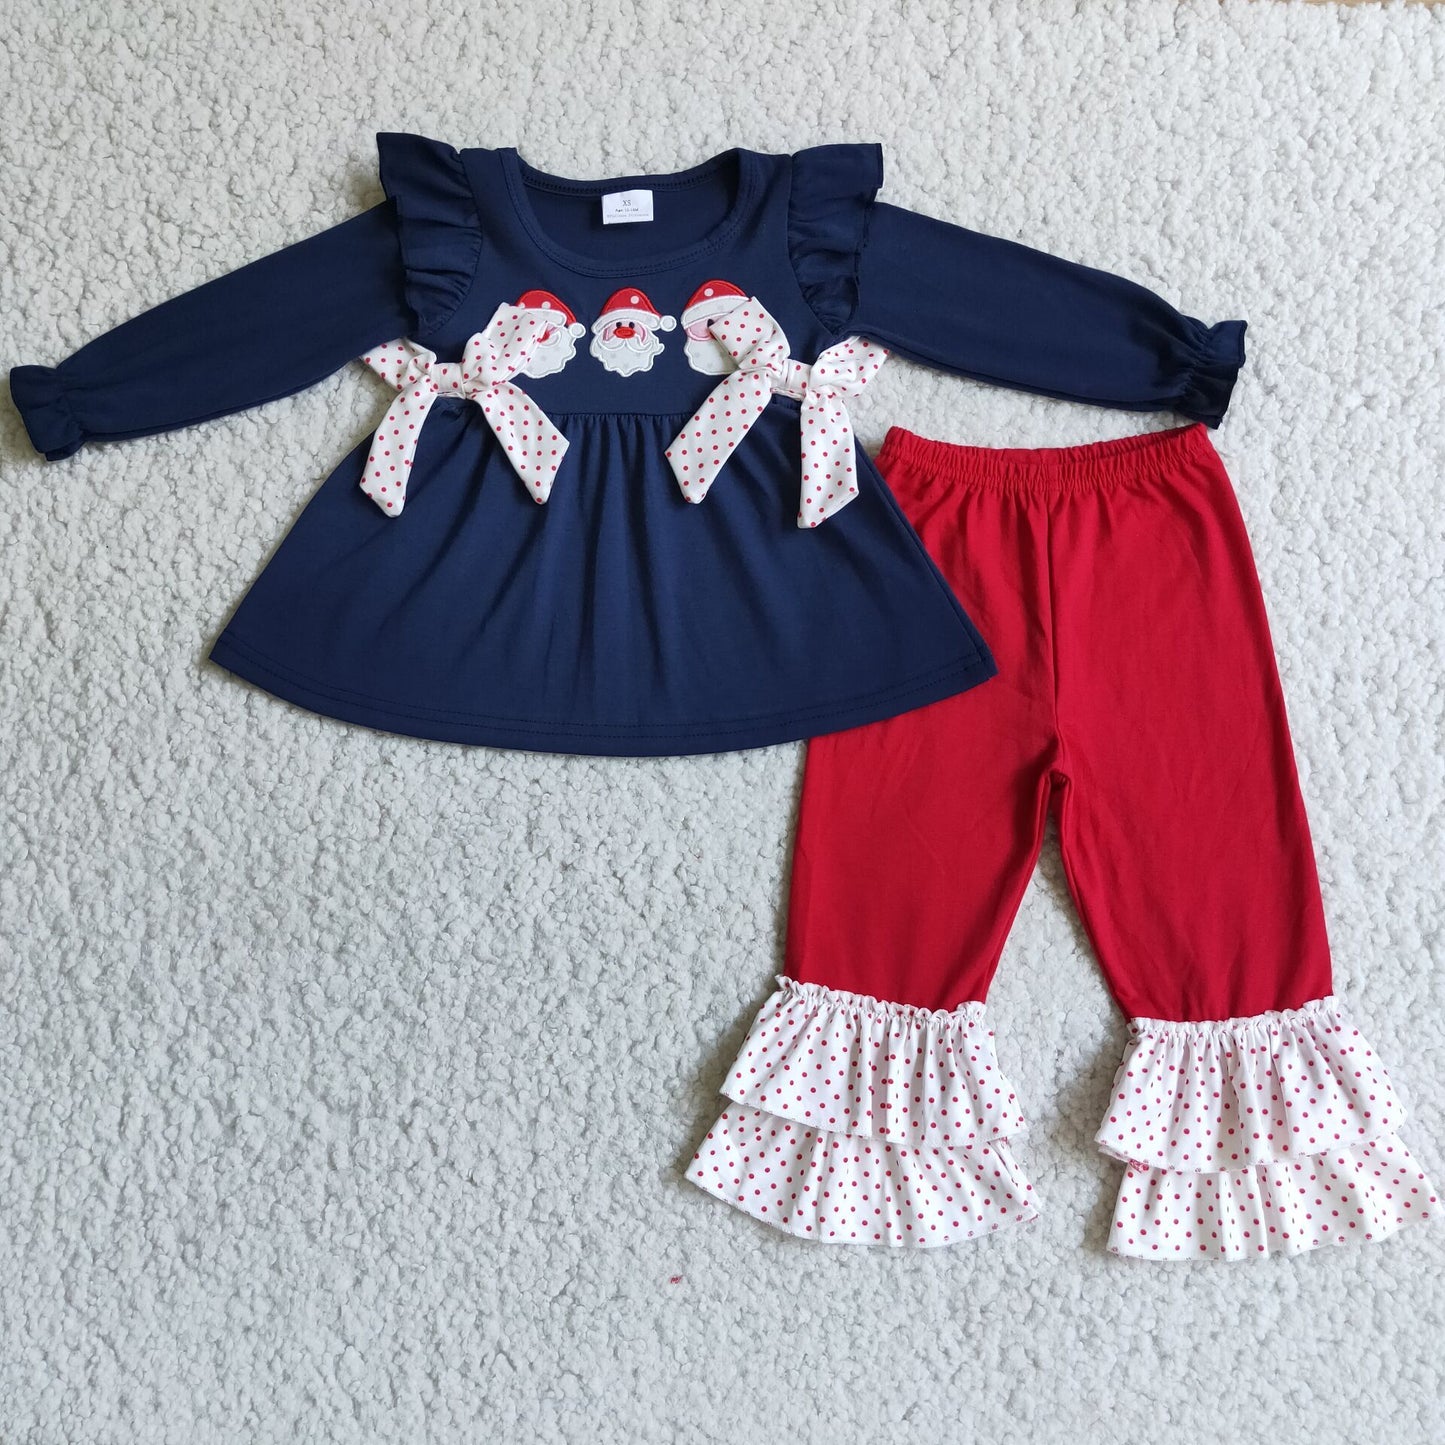 (Promotion) Long sleeve ruffle pants Christmas embroideried outfits   6 B7-39